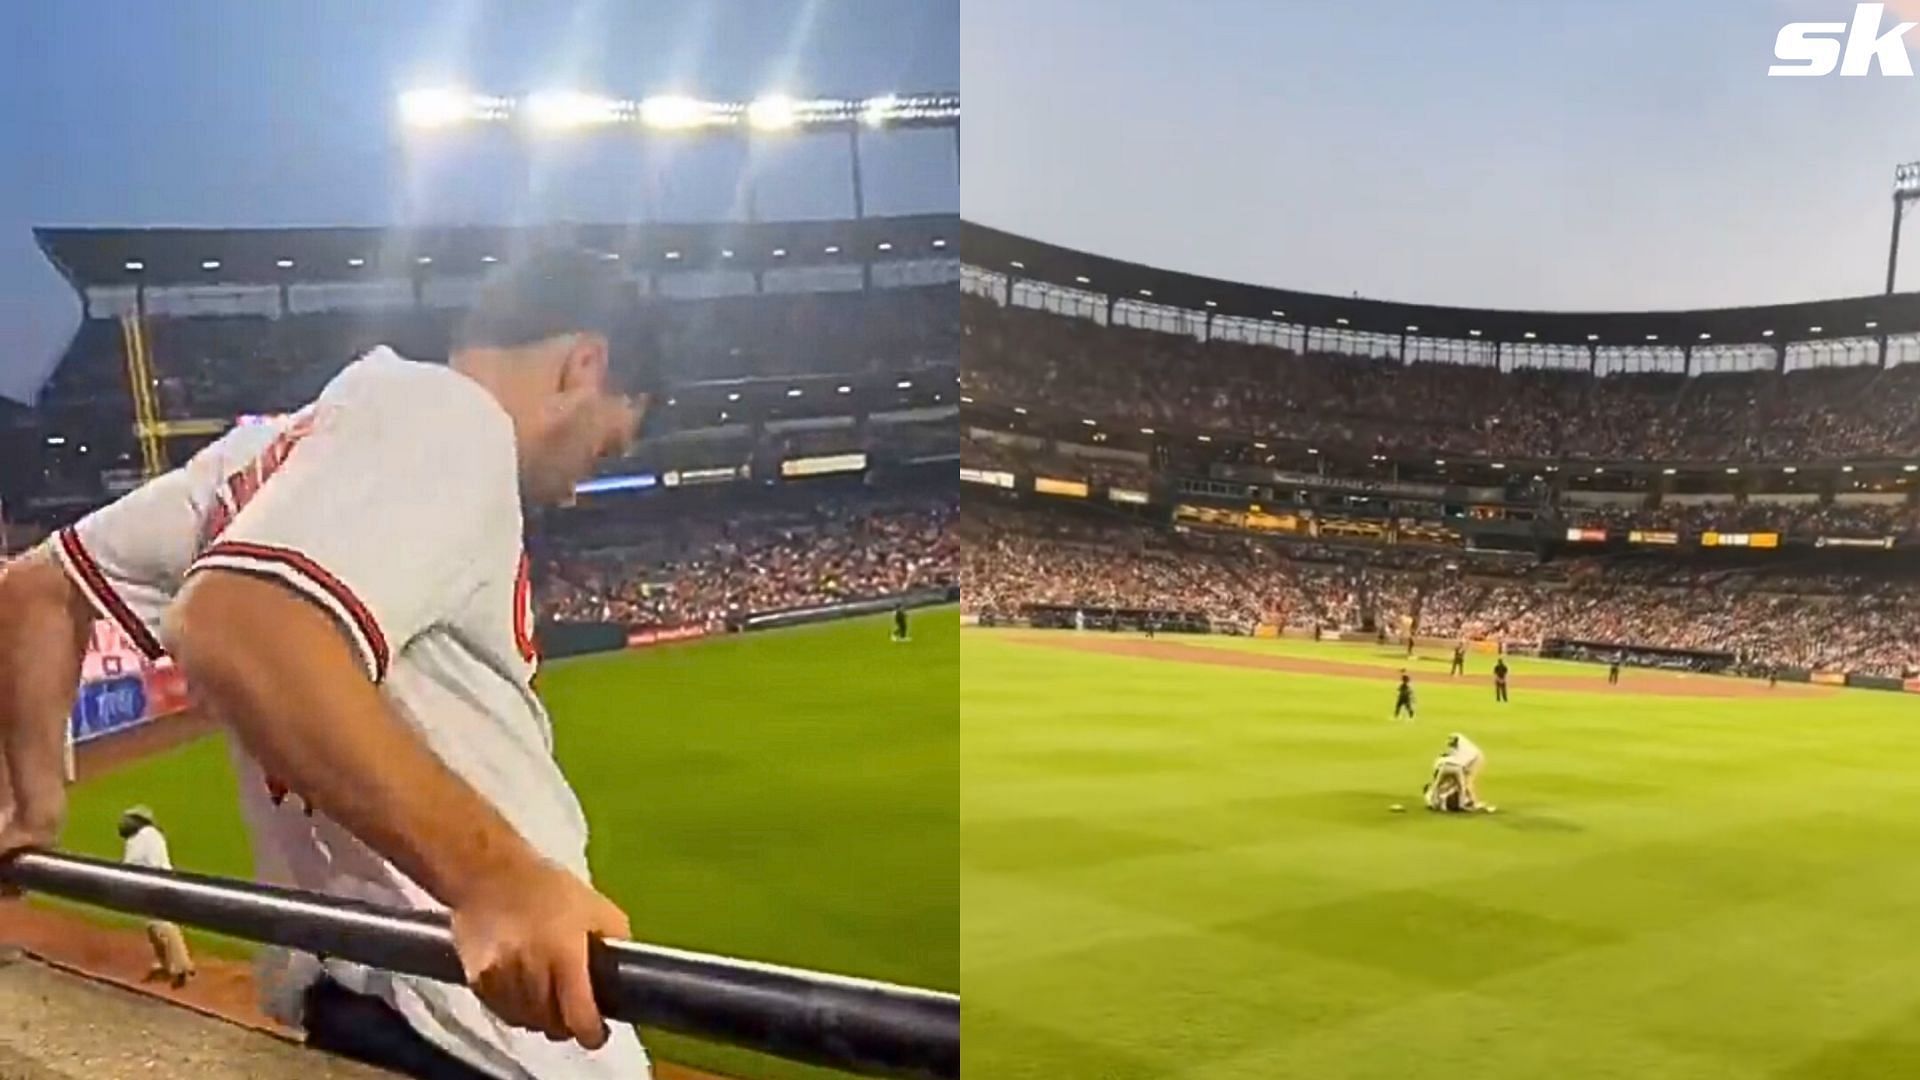 Orioles fan gets trucked by security guard as he runs into the field